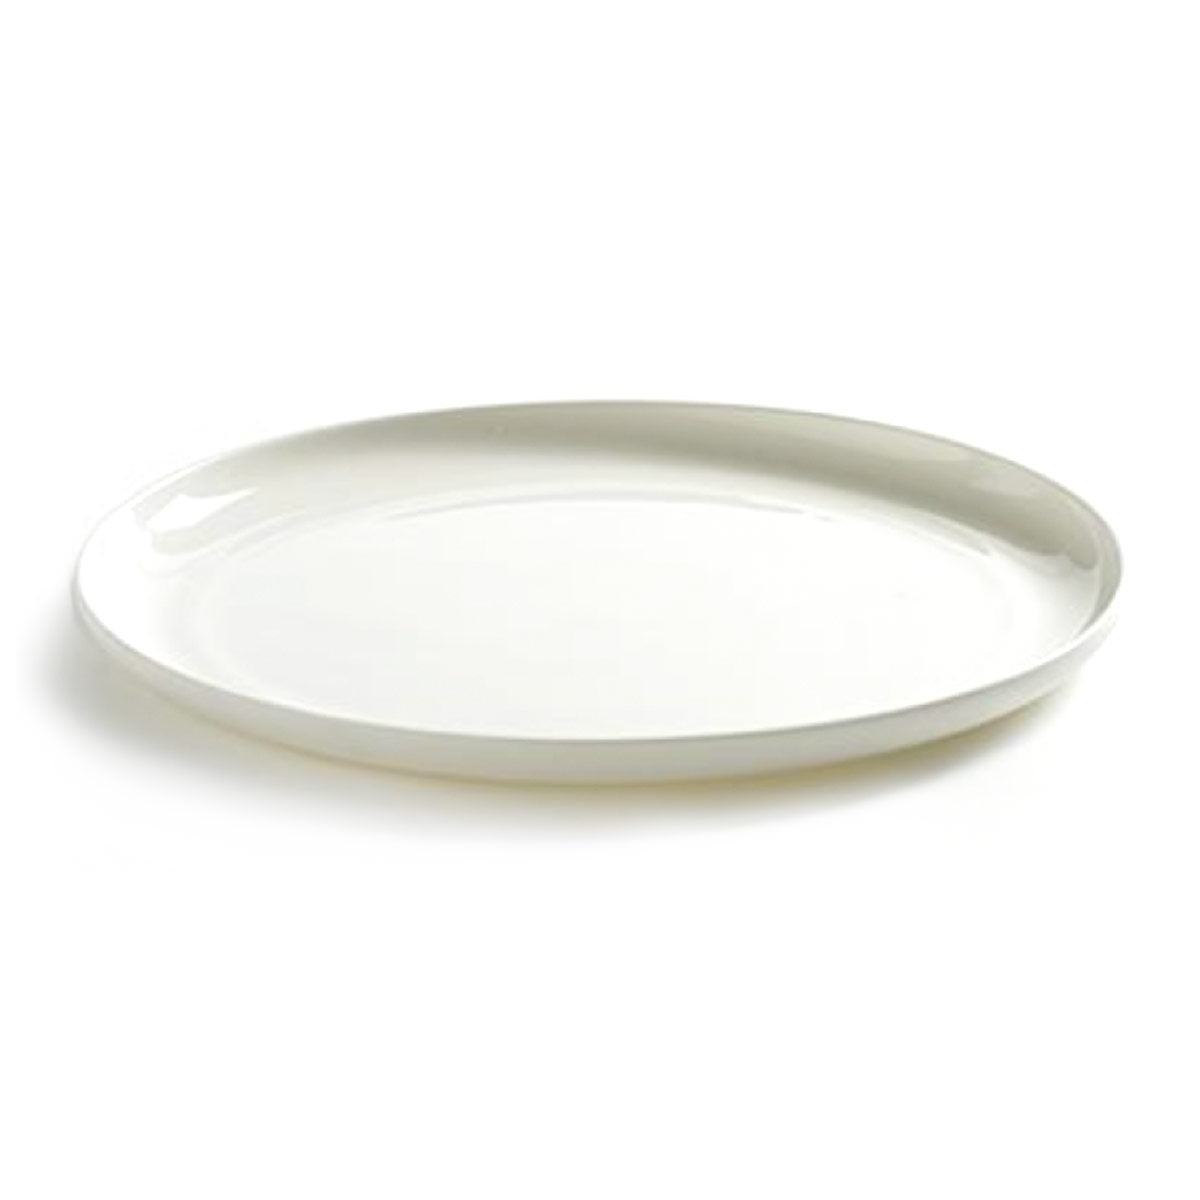 Piet Boon Low Plate